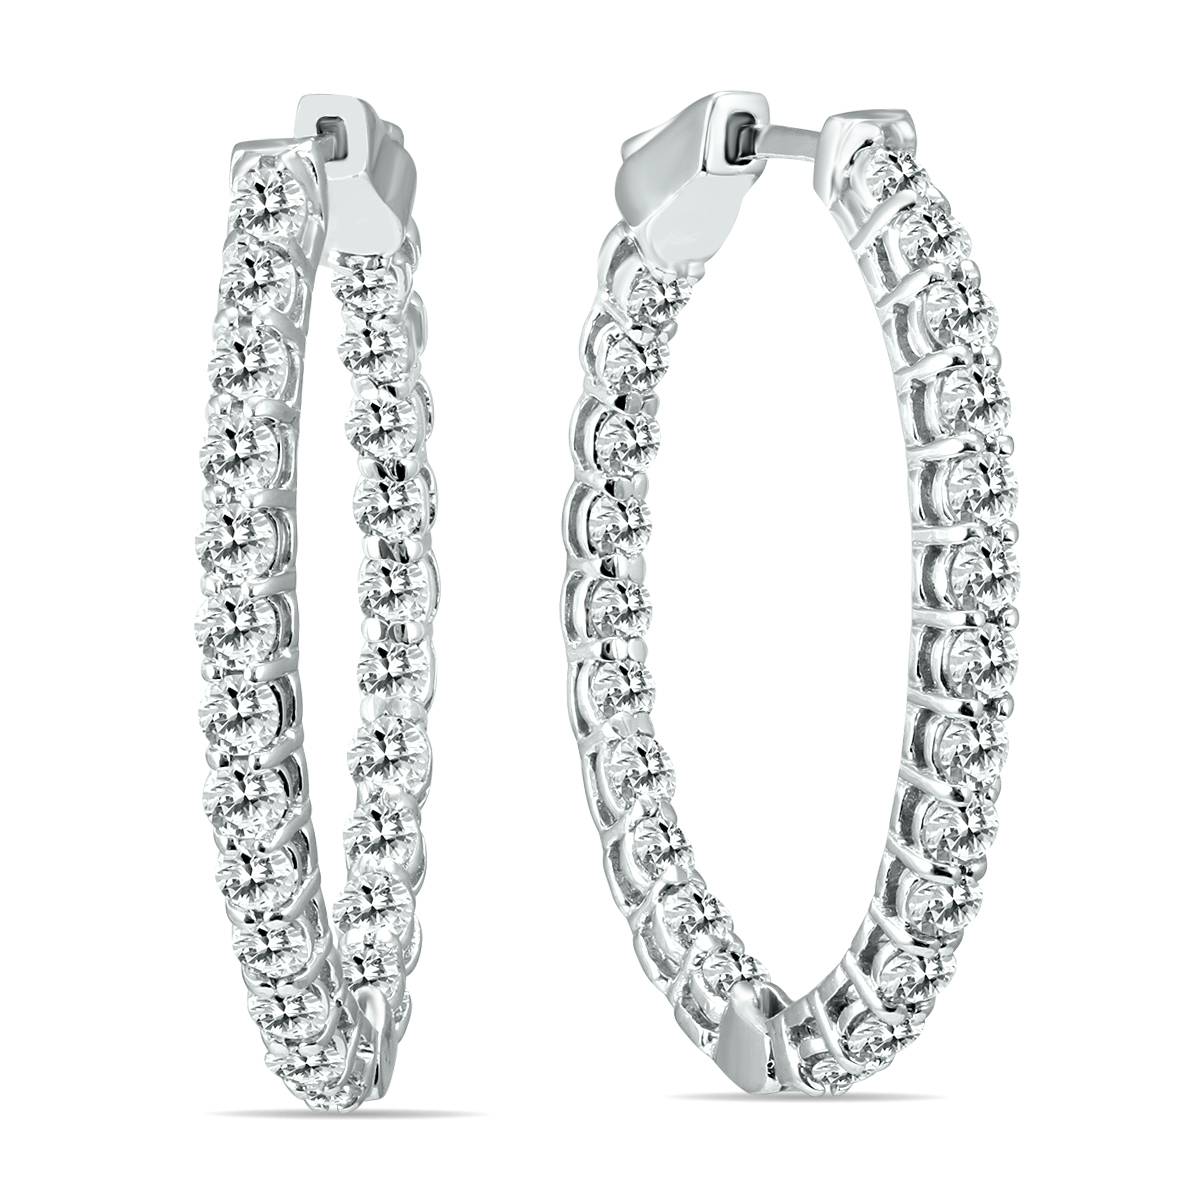 2 CTW Oval Genuine Diamond Hoop Earrings with Push Button Locks in 14K White Gold